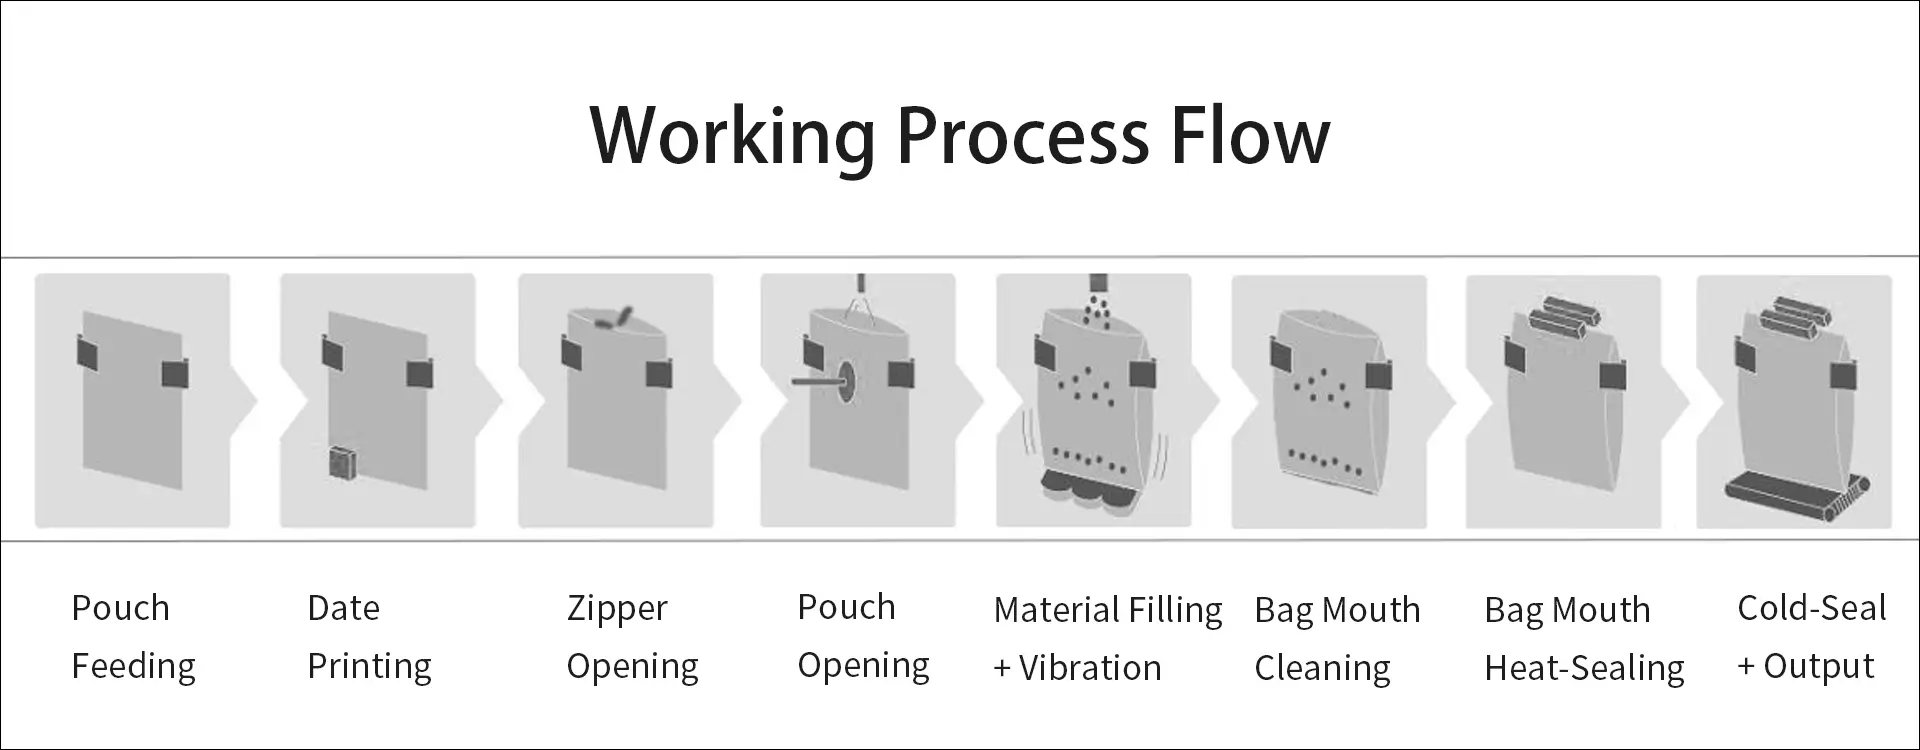 Model SP8-300G Automatic Granule Rotary Packaging Machine Solution Working Process Flow | Solution-Pack